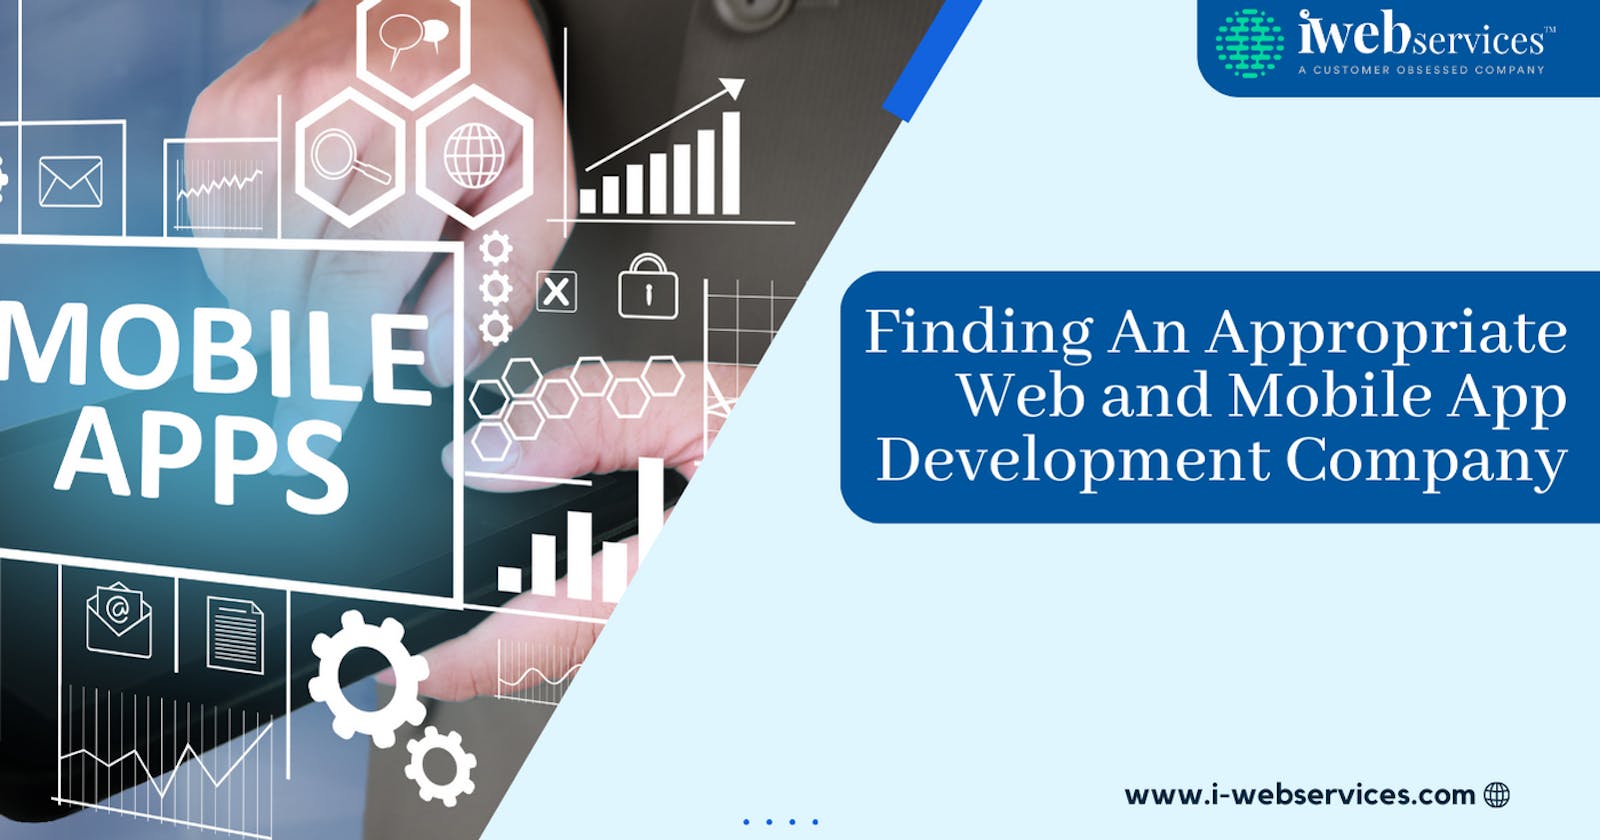 Finding an Appropriate Web and Mobile App Development Company